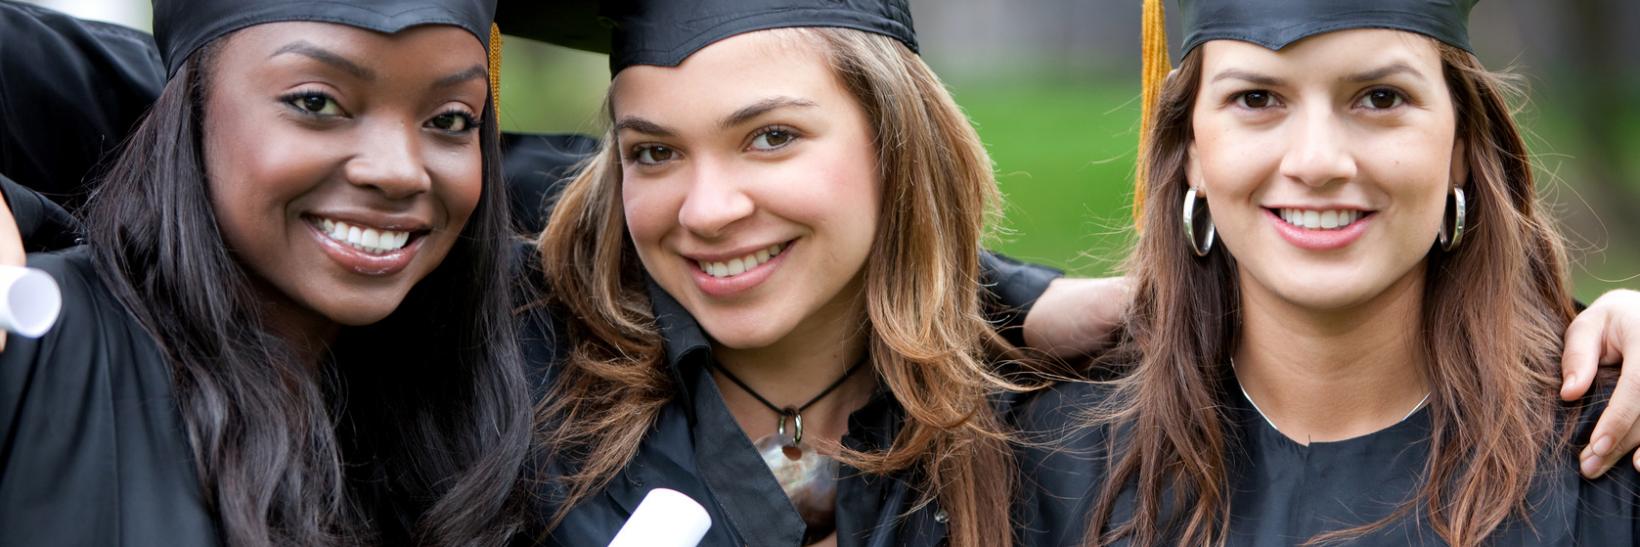 Female students wearing caps and gowns at graduation.